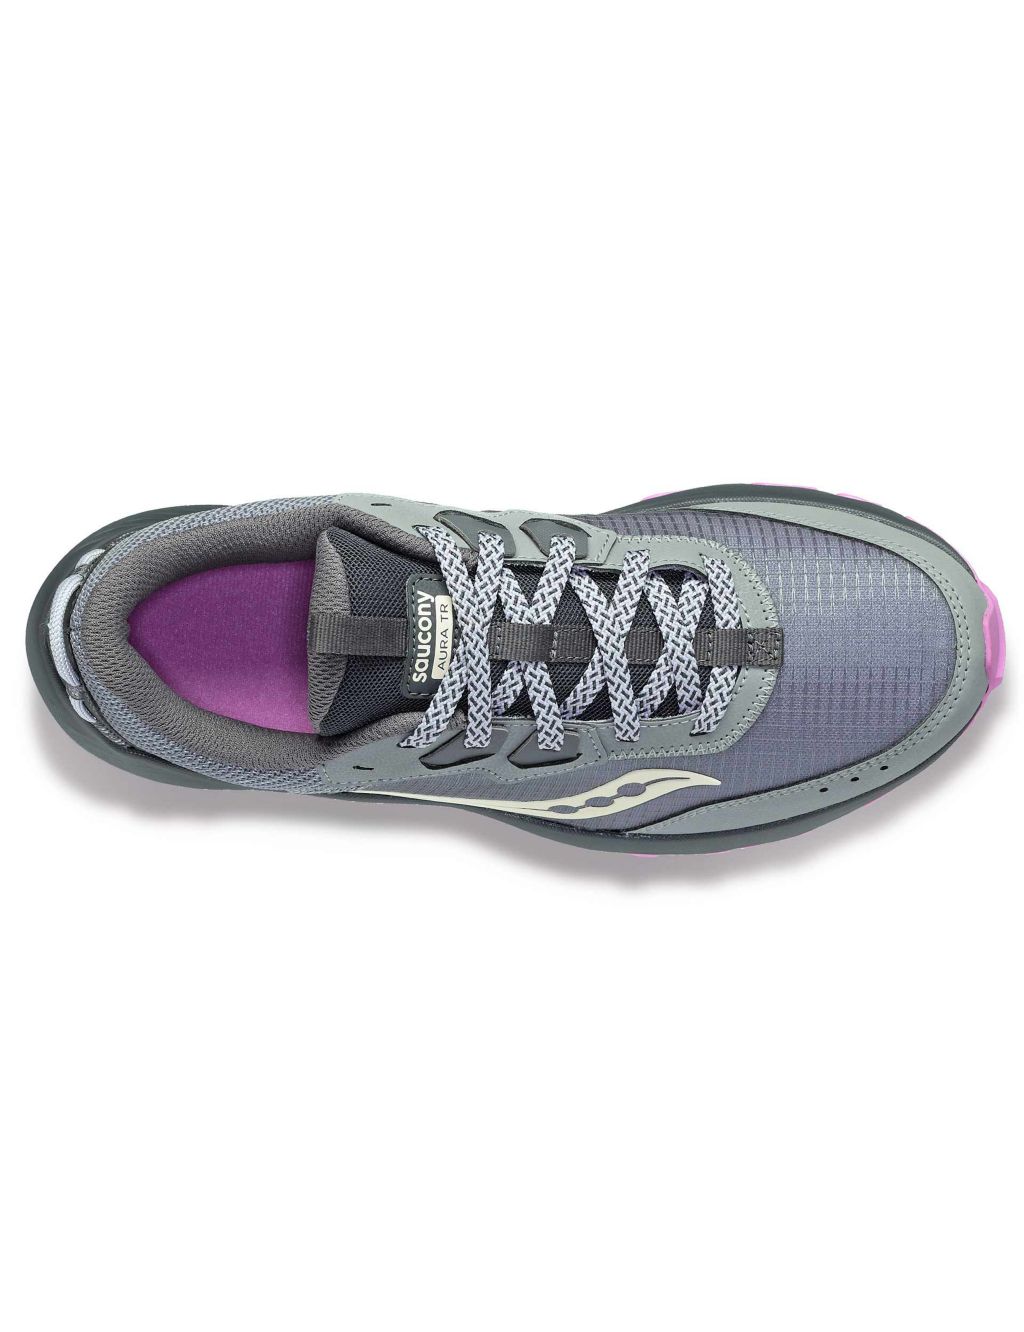 Aura TR Trainers image 4